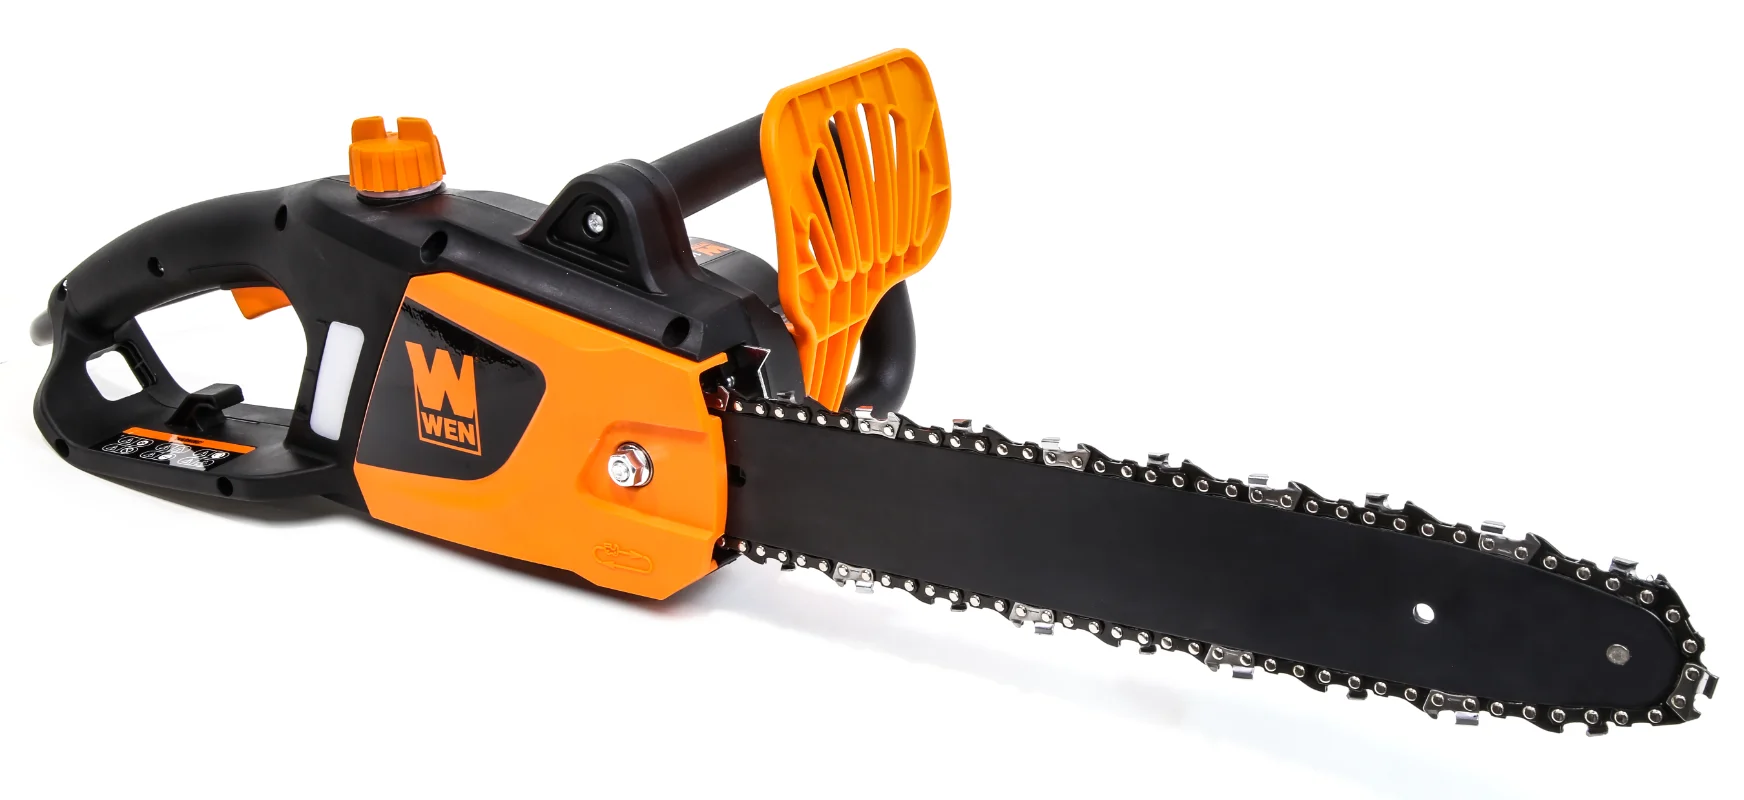 9-Amp 14-Inch Electric Chainsaw